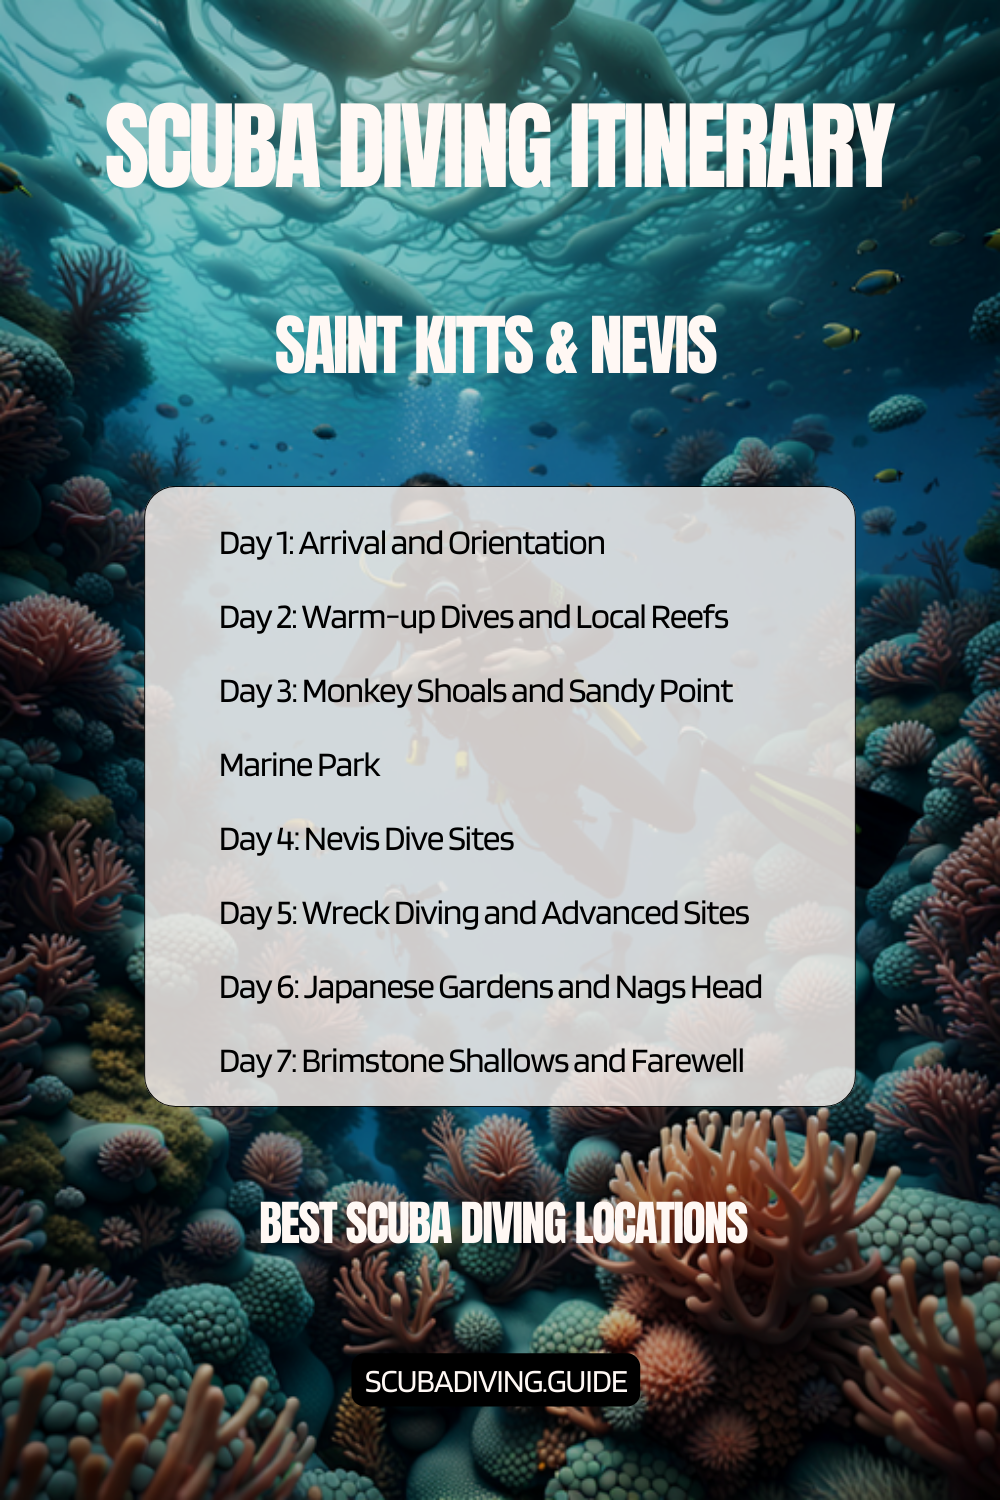 Saint Kitts & Nevis Recommended Scuba Diving Itinerary